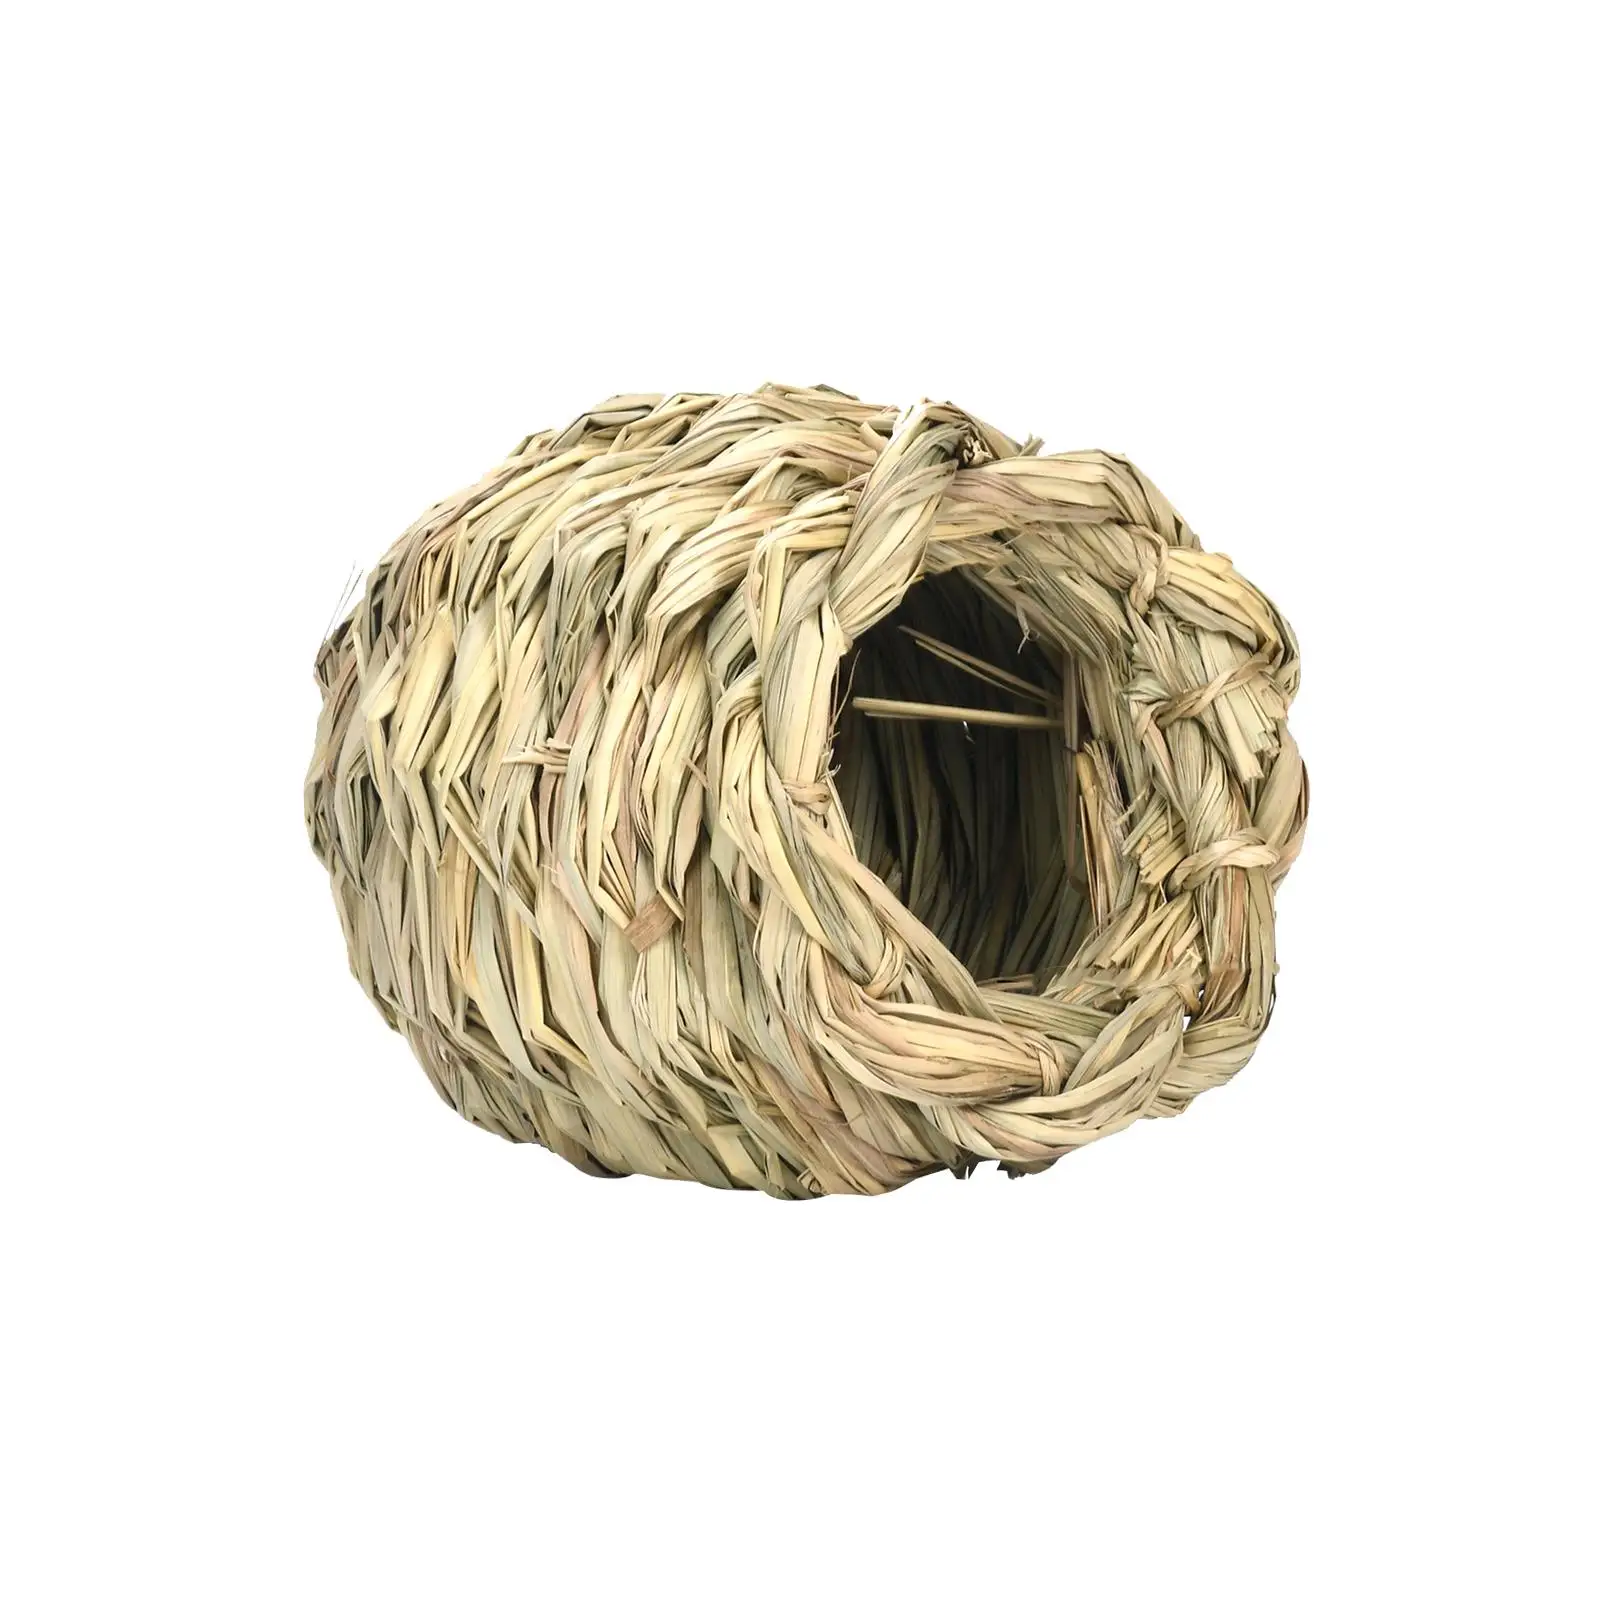 Rabbit Grass House Bed Hanging Straw Cage Nest Hideaway Hut Rest Room Tube Chew